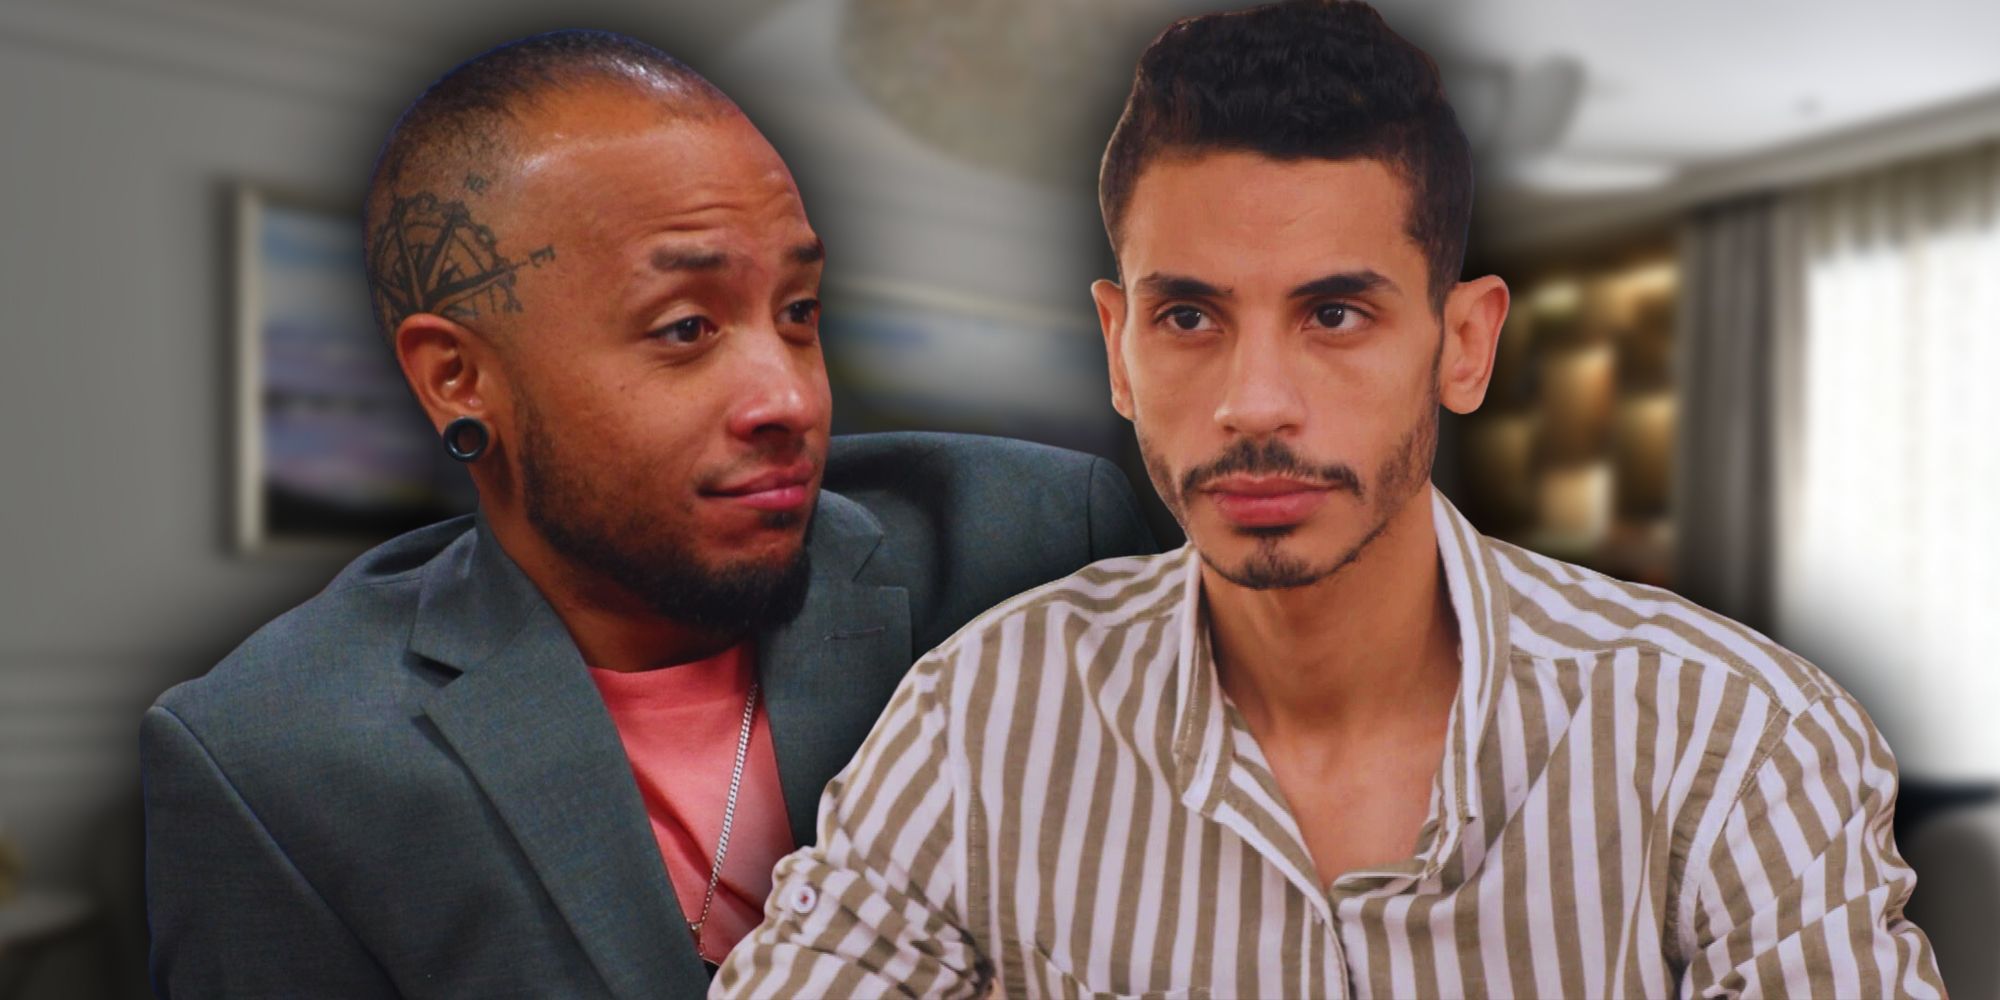 Gabe Paboga and Mahmoud El Sherbiny from 90 Day Fiance look serious